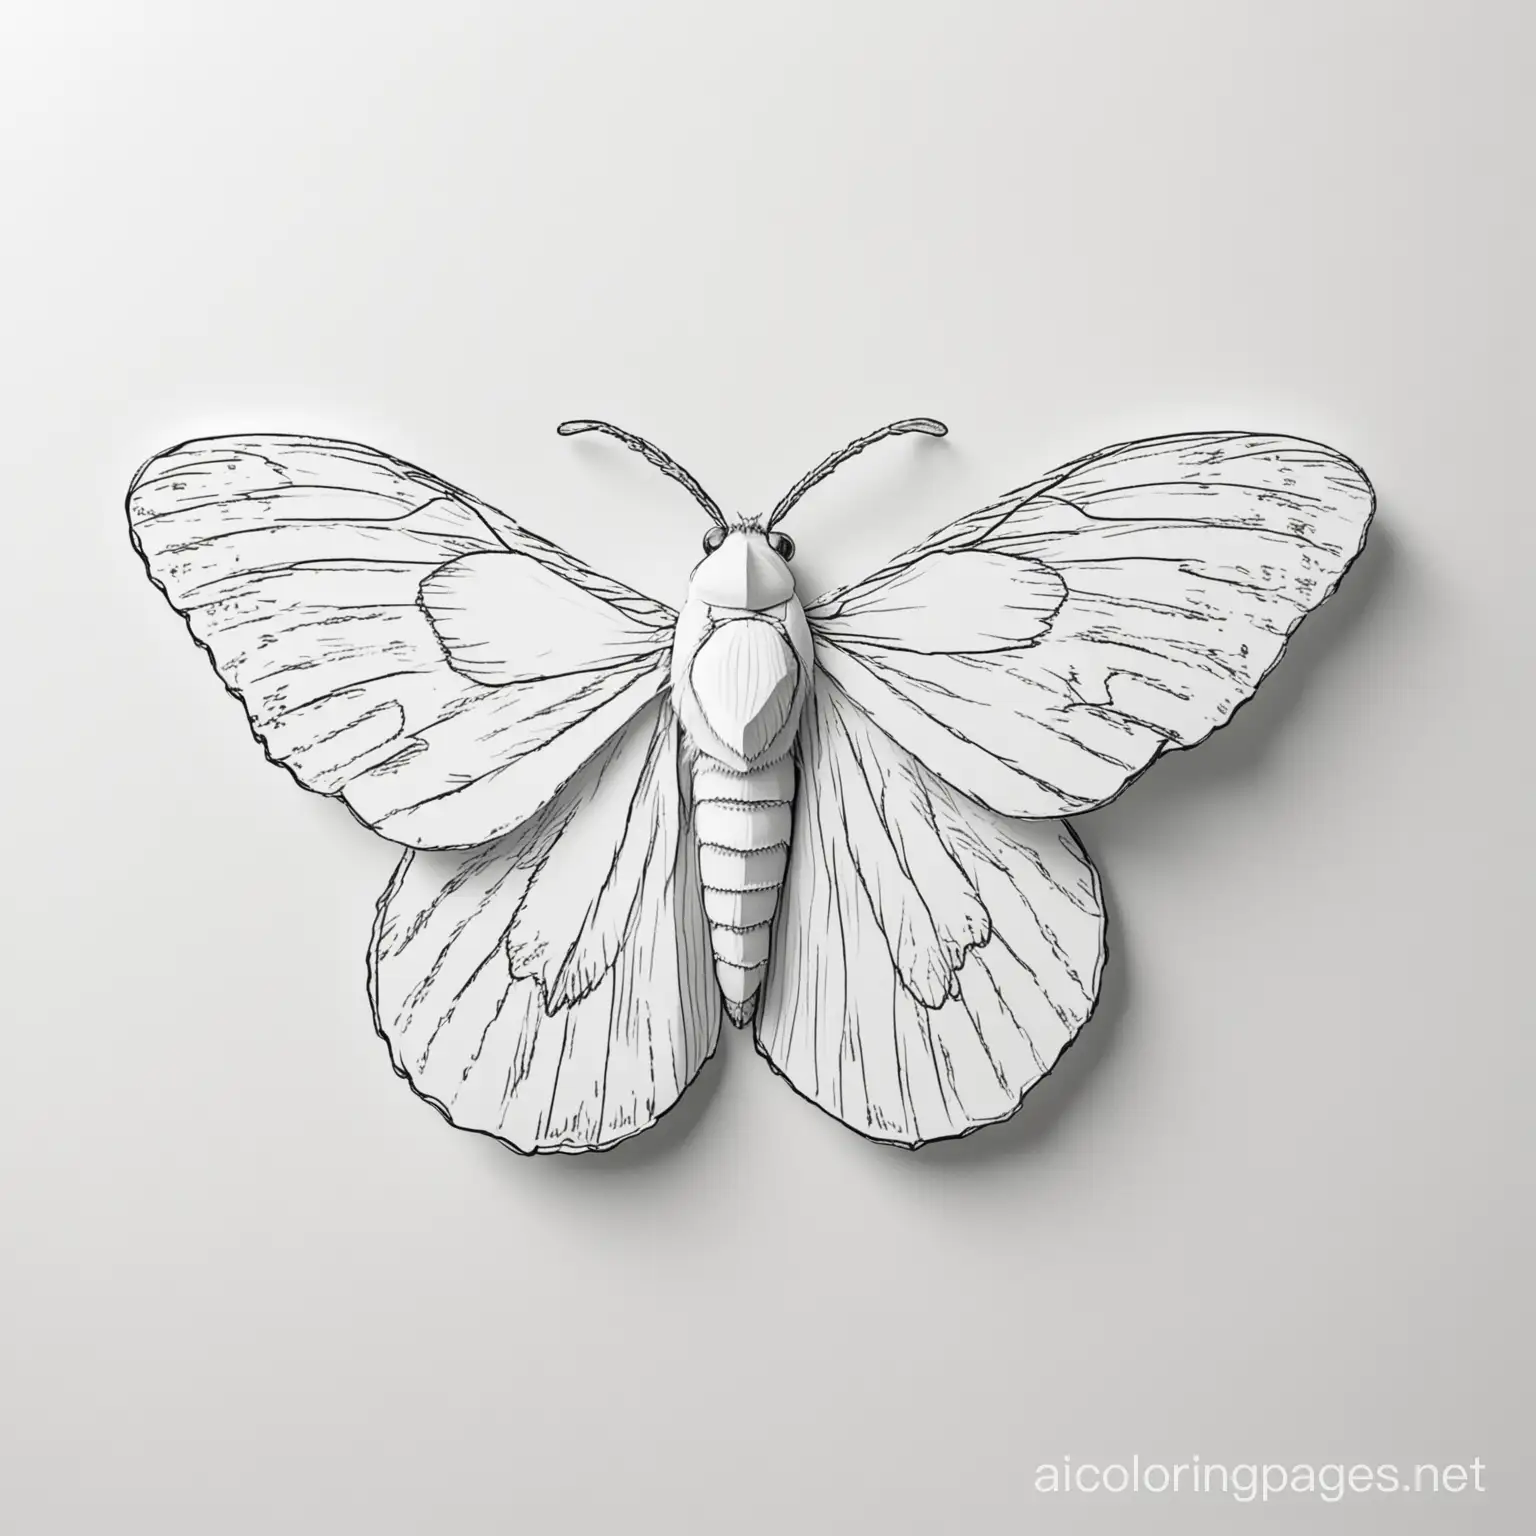 moth on wall, Coloring Page, black and white, line art, white background, Simplicity, Ample White Space. The background of the coloring page is plain white to make it easy for young children to color within the lines. The outlines of all the subjects are easy to distinguish, making it simple for kids to color without too much difficulty